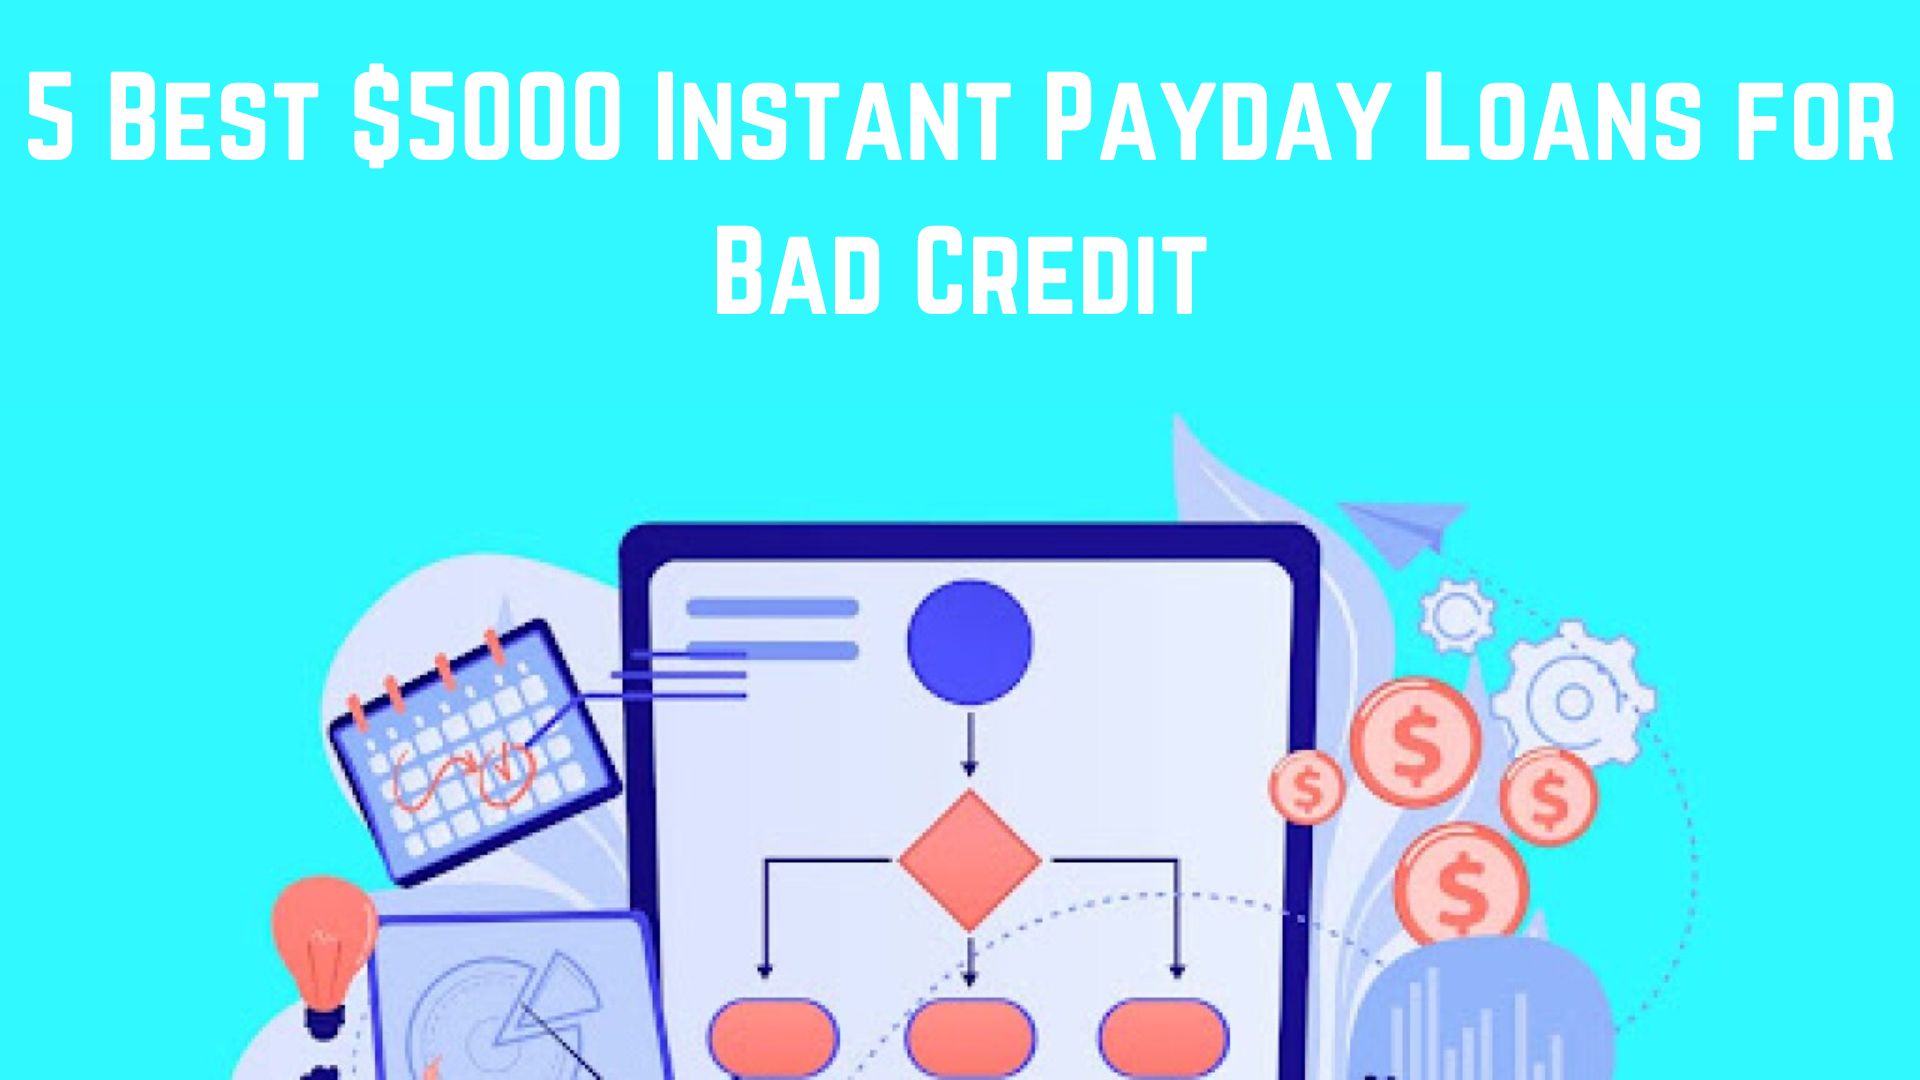 5 Best $5000 Instant Payday Loans for Bad Credit